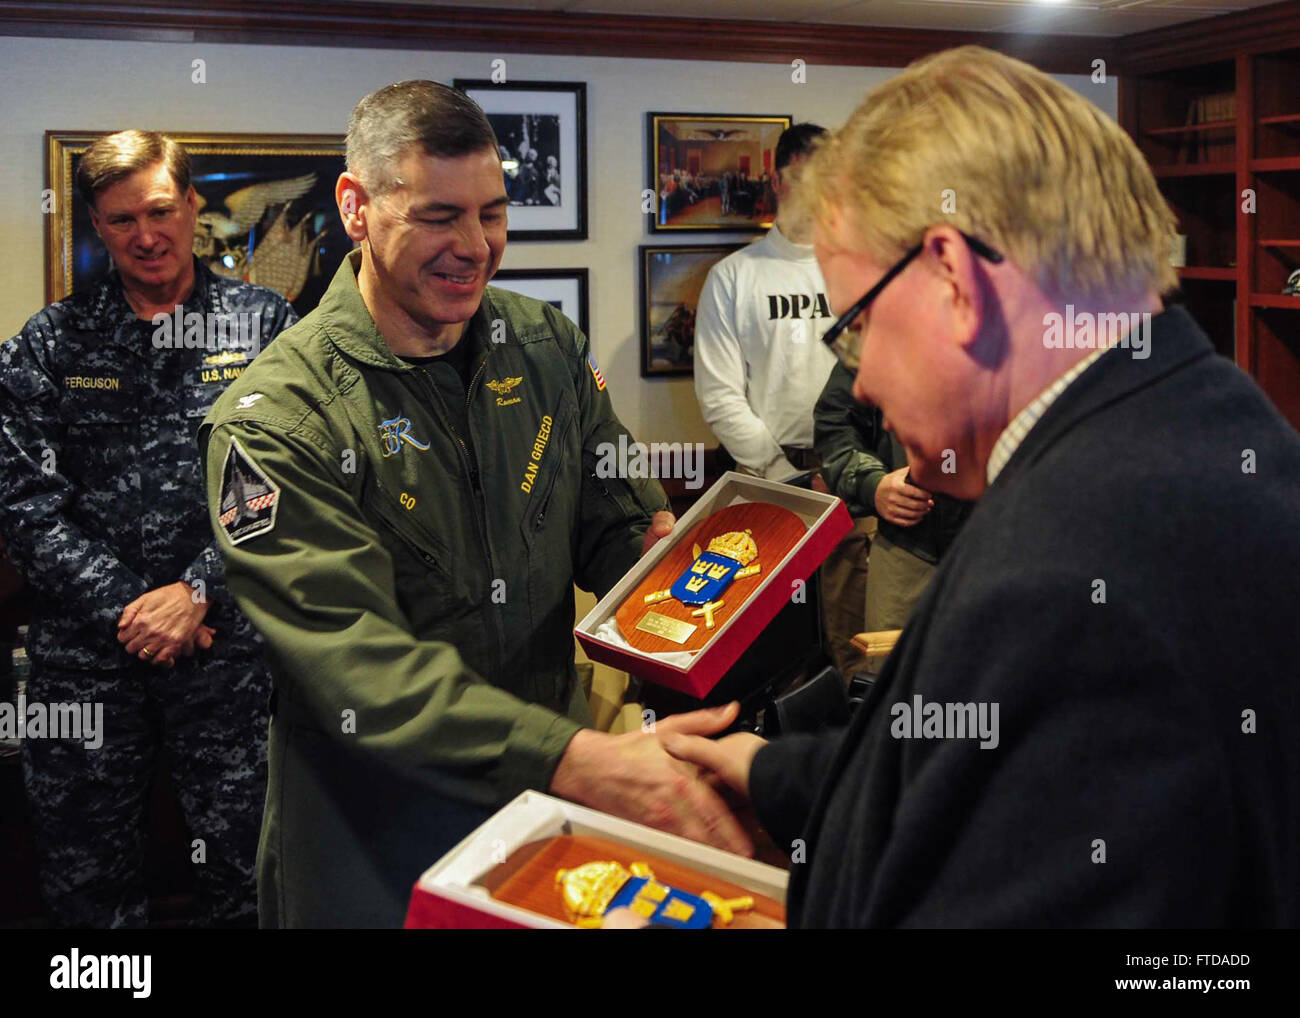 150322-N-ZZ999-031 ATLANTIC OCEAN (March 22, 2015) Commanding Officer of the Nimitz-class aircraft carrier USS Theodore Roosevelt (CVN 71) Capt. Daniel Grieco, left, receives a token of appreciation from the Swedish Minister of Defence Peter Hultqvist aboard Theodore Roosevelt March 22, 2015. Theodore Roosevelt, homeported in Norfolk, is conducting naval operations in the U.S. 6th Fleet area of operations in support of U.S. national security interests in Europe. (U.S. Navy photo by Mass Communication Specialist Seaman Anthony Hopkins II/Released) Stock Photo